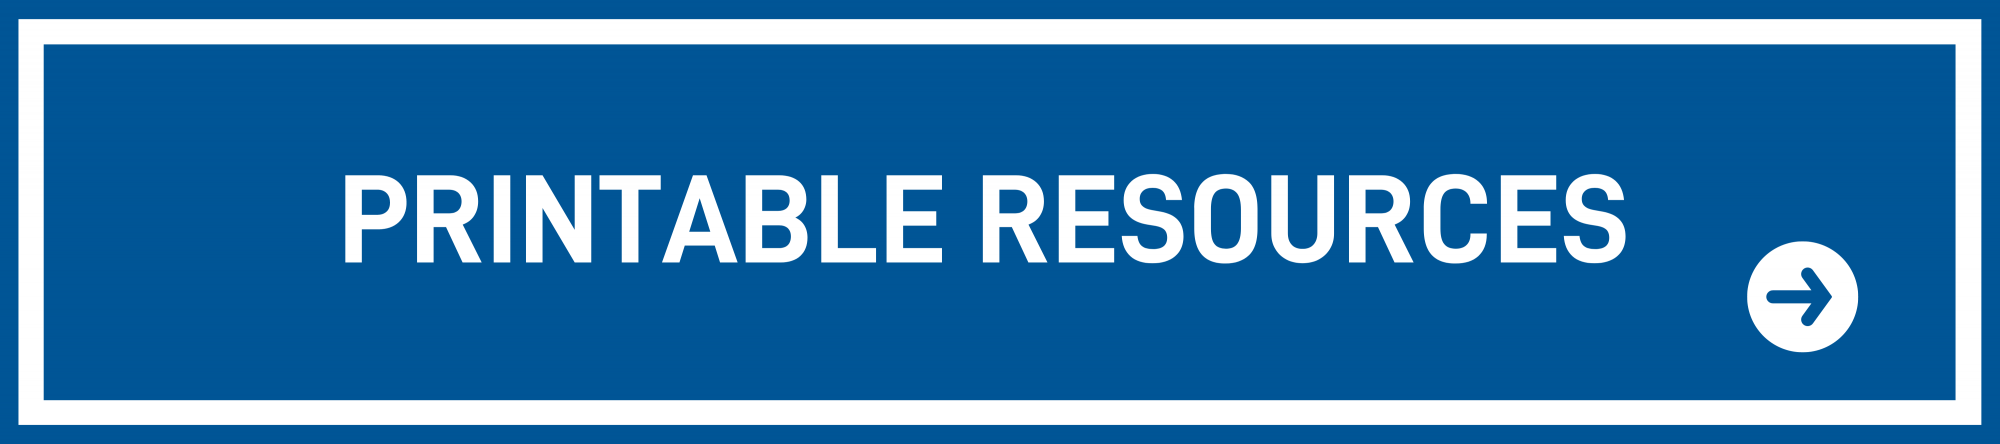 Blue box with white text that says "Printable resources"